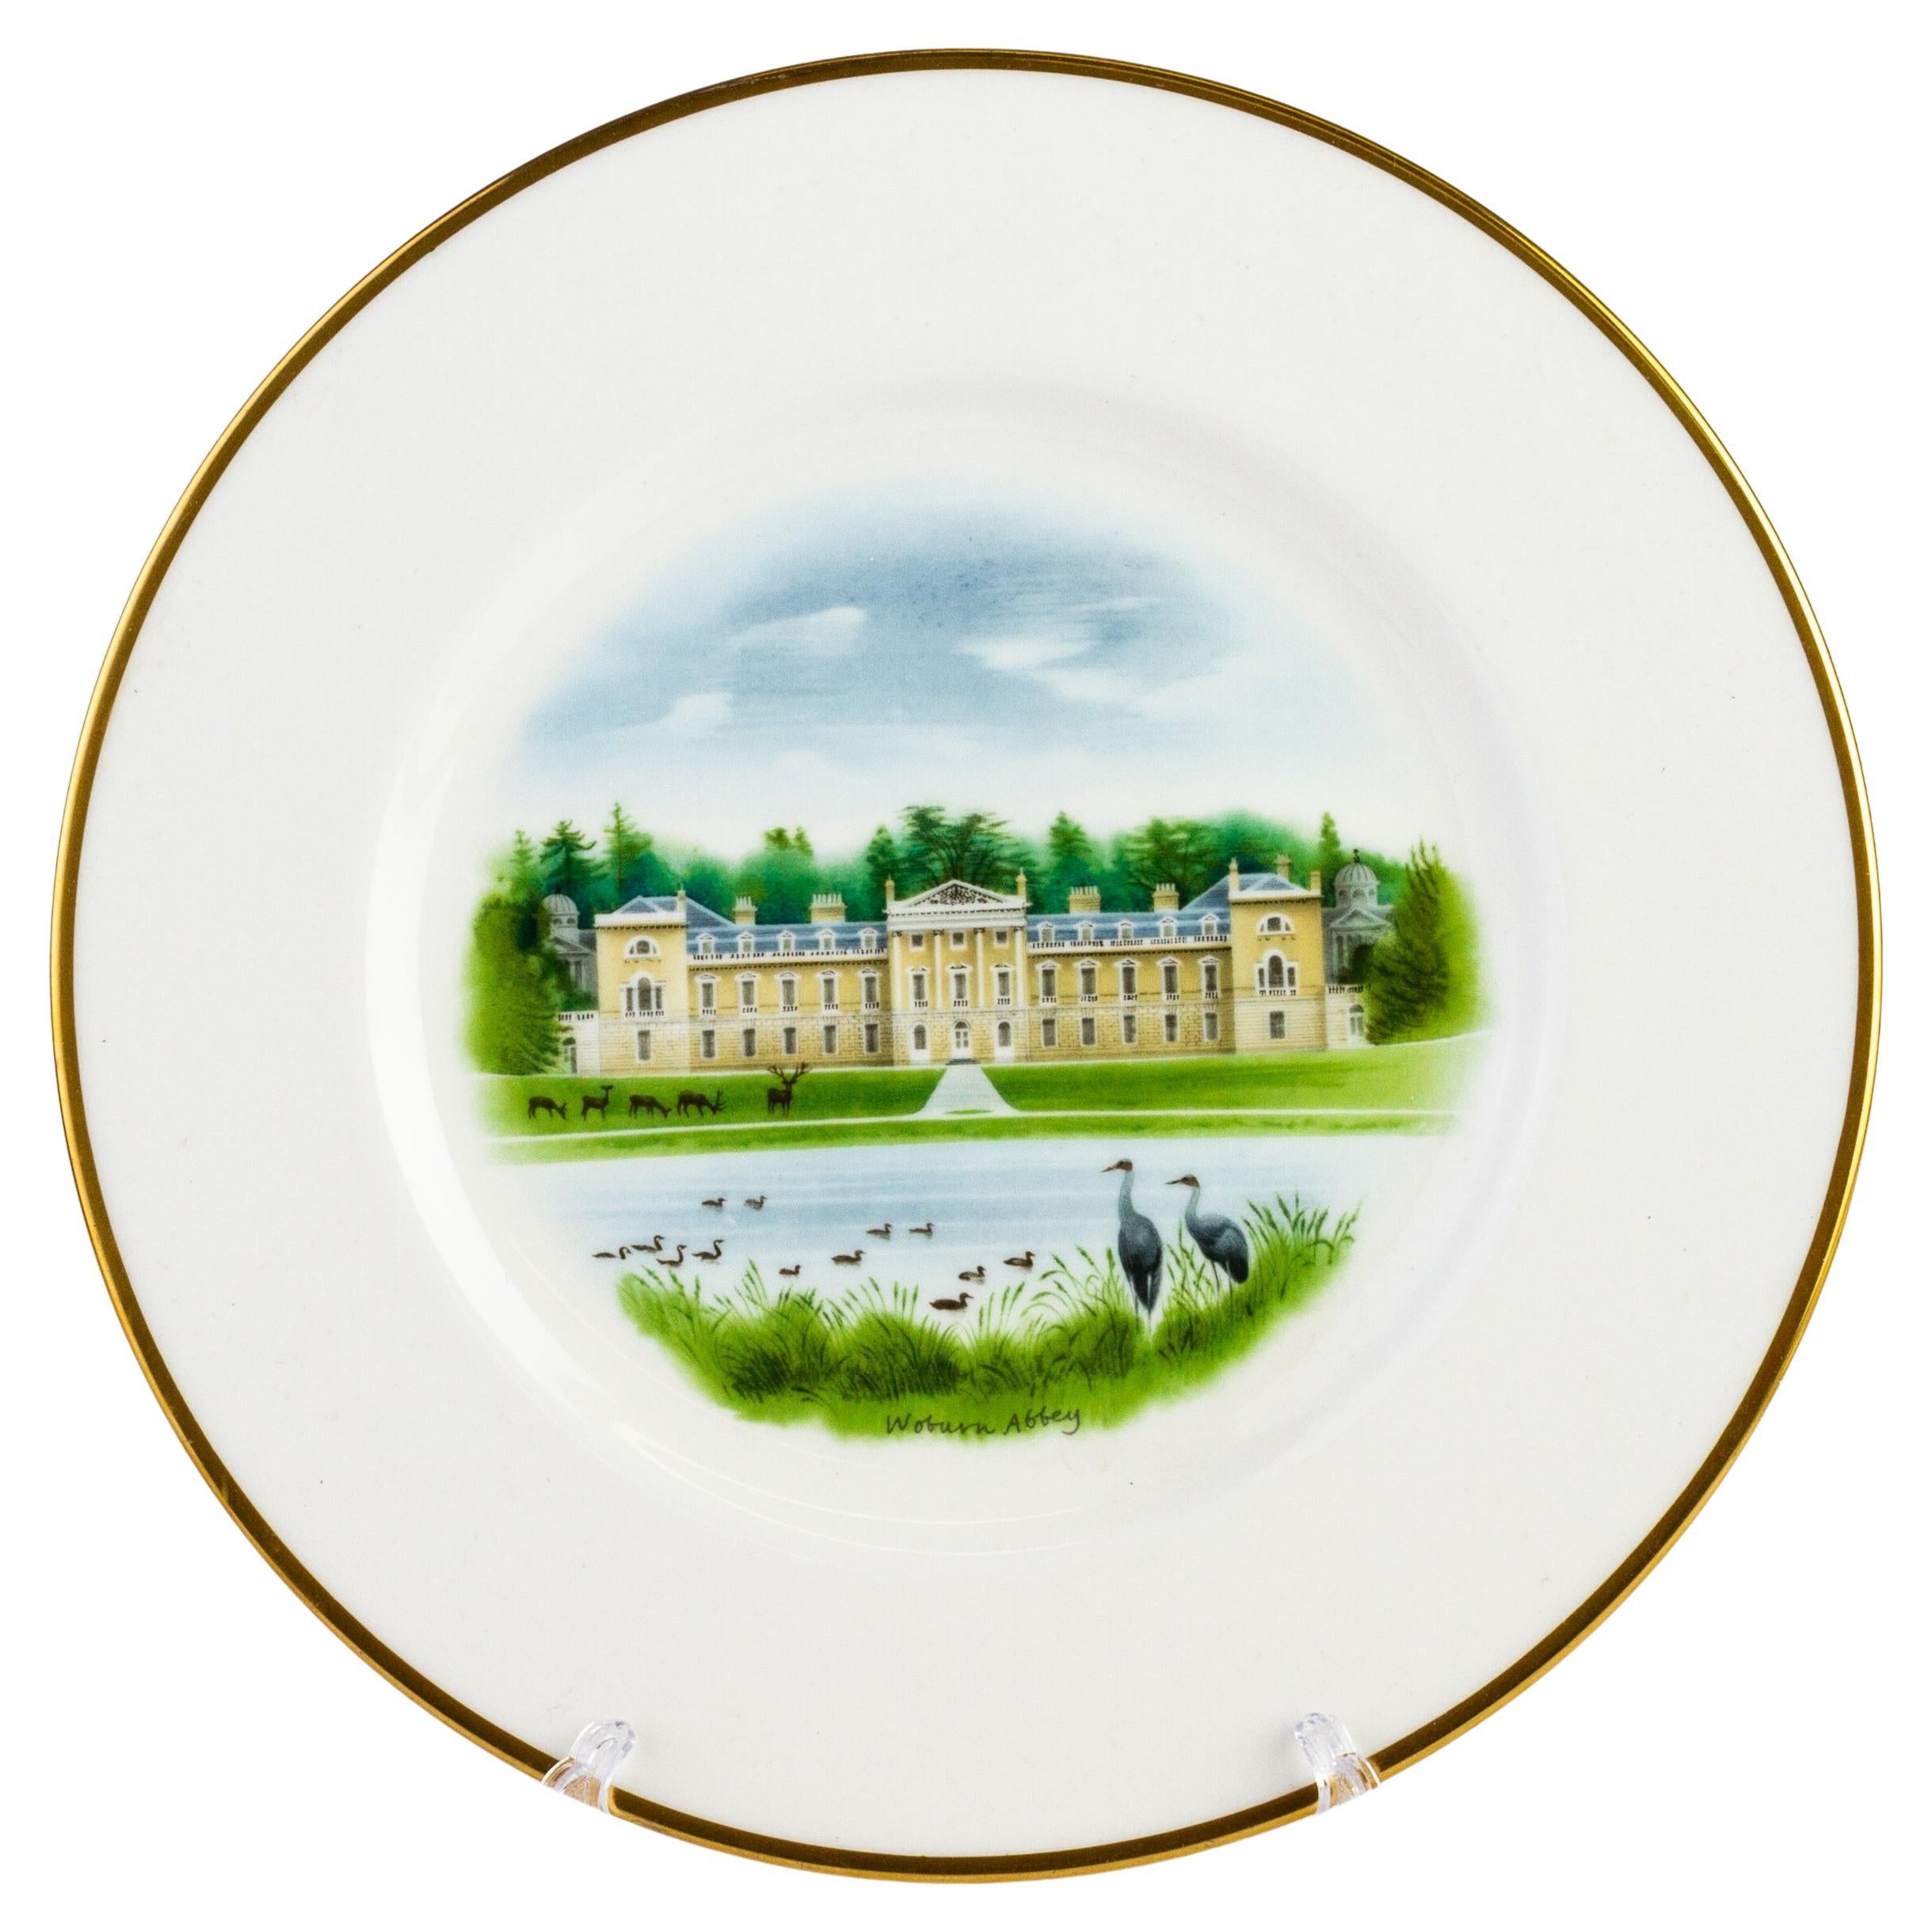 Wedgwood Fine English Porcelain Plate Depicting Woburn Abbey For Sale